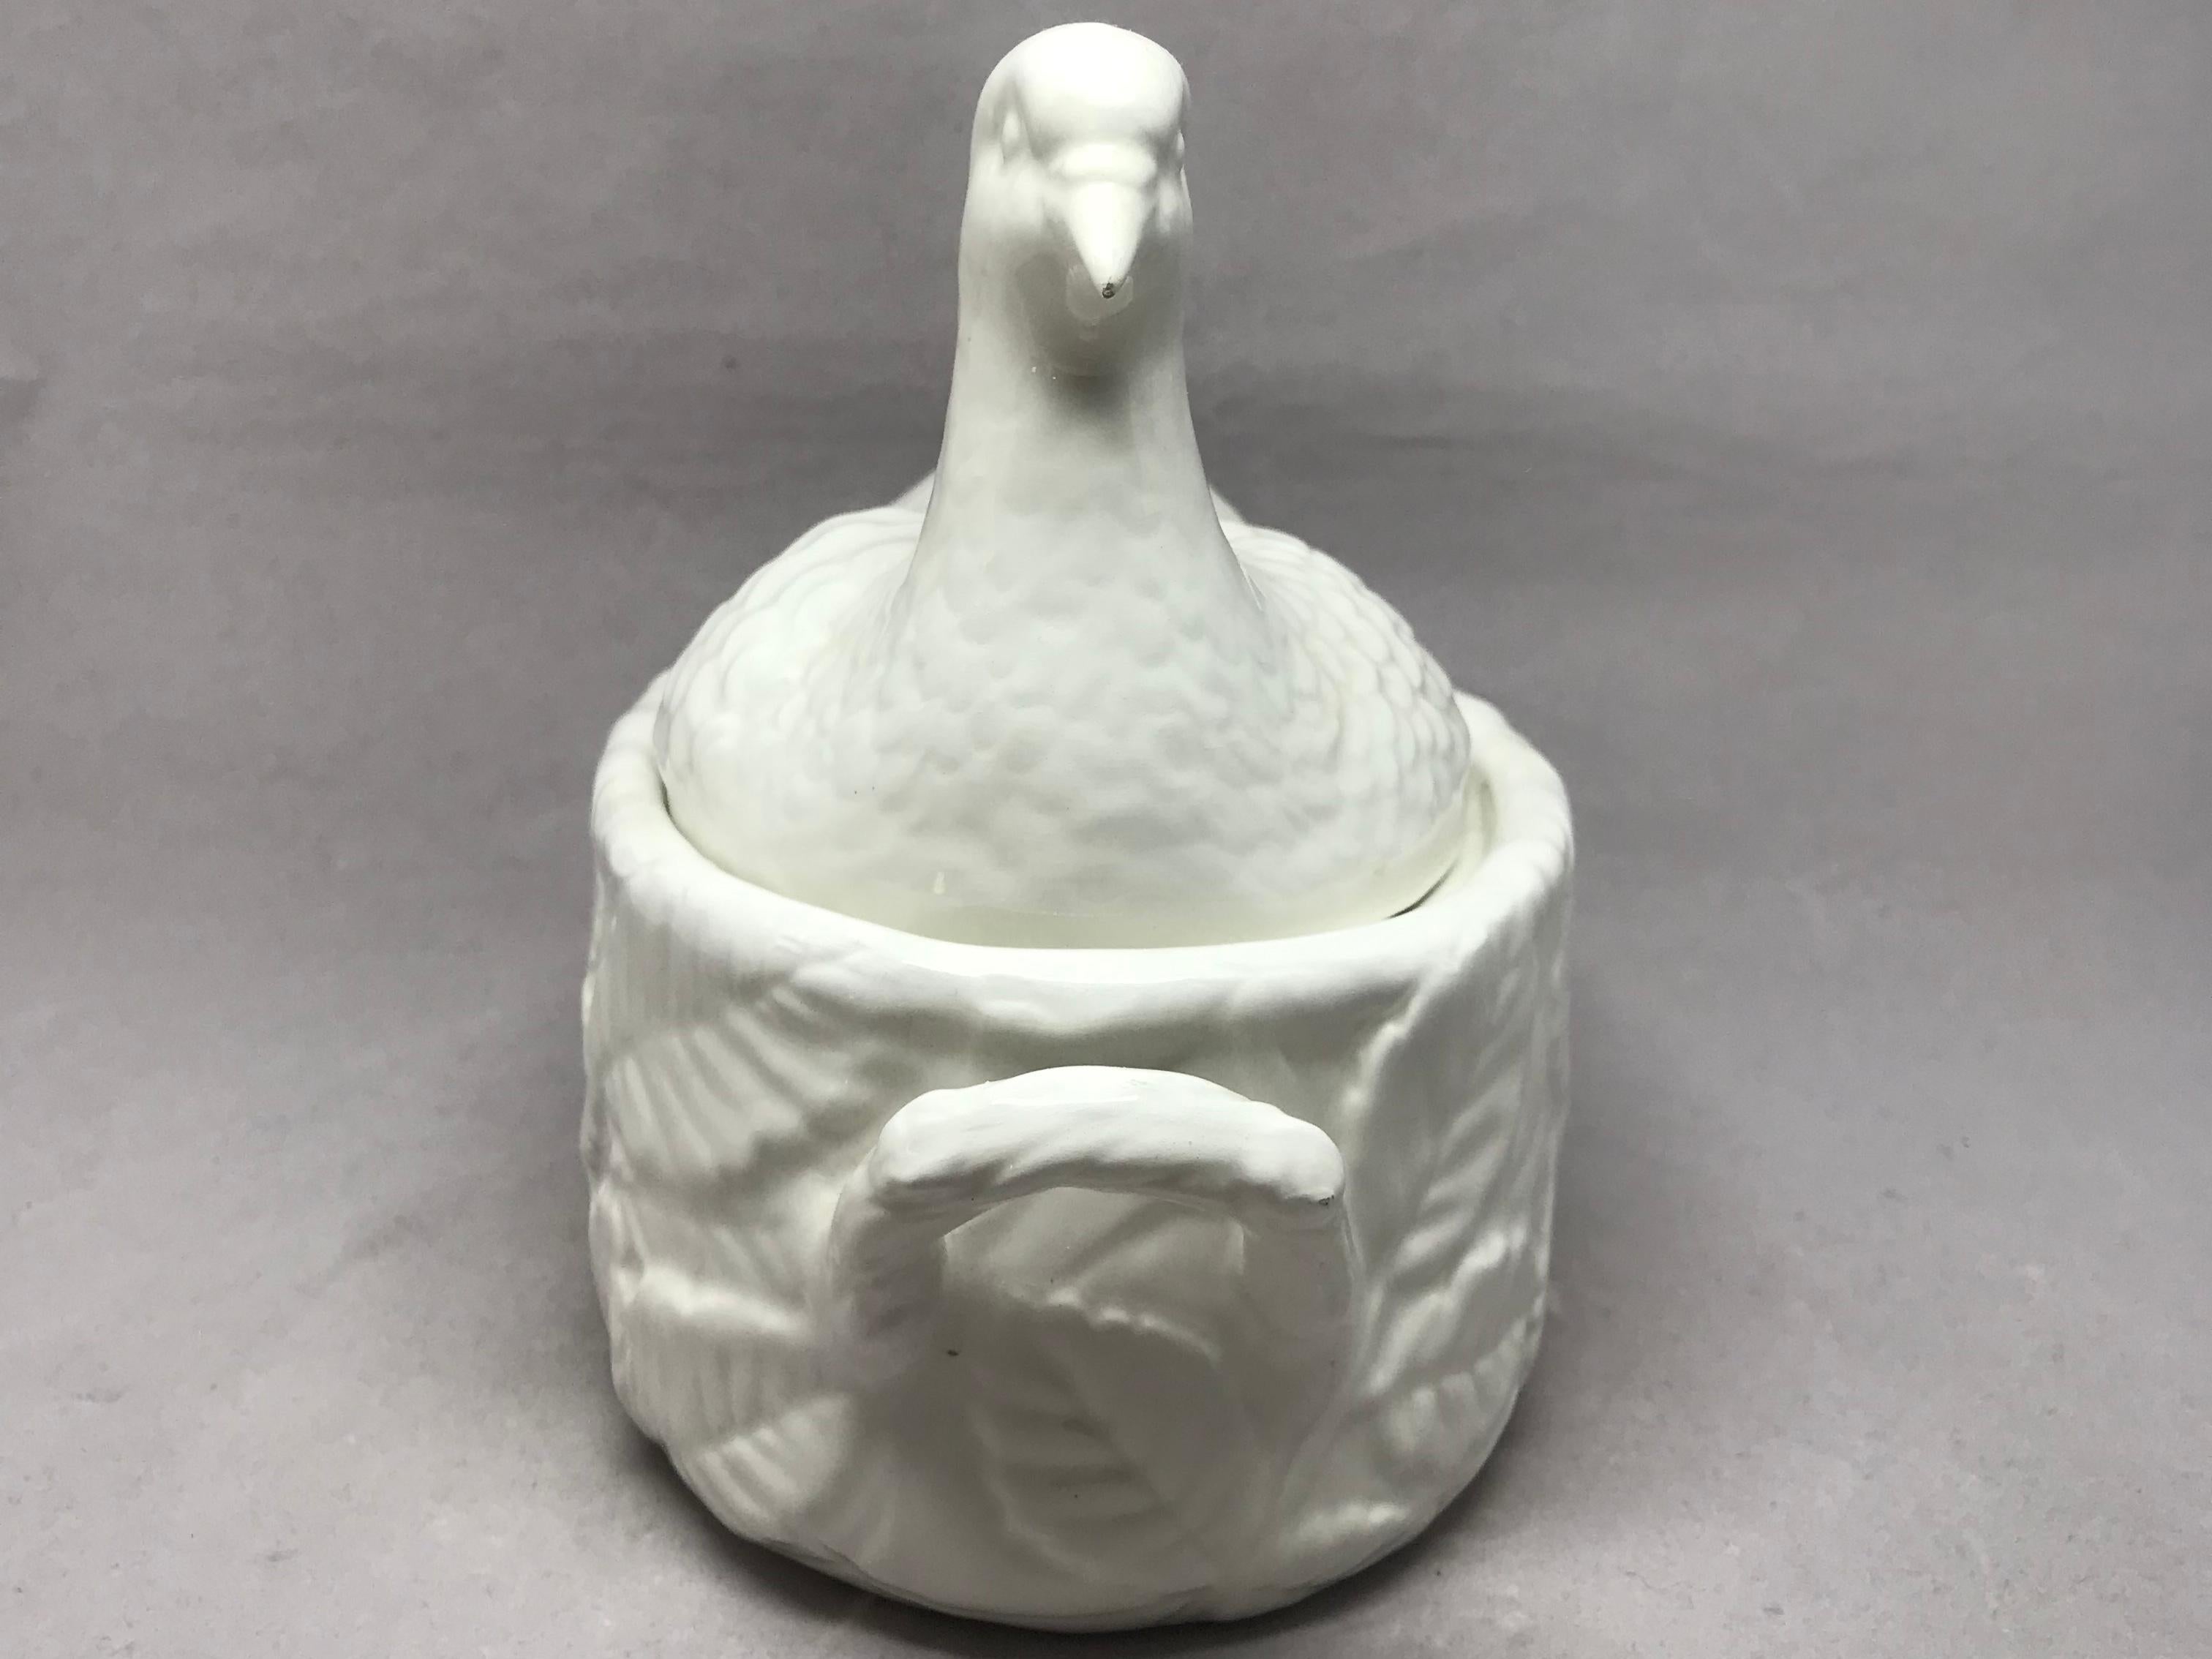 White dove tureen. Small vintage Italian white lidded serving dish in the form of an Easter dove nesting on a foliate handled basket, Italy, circa 1960 
Dimensions: 7.5